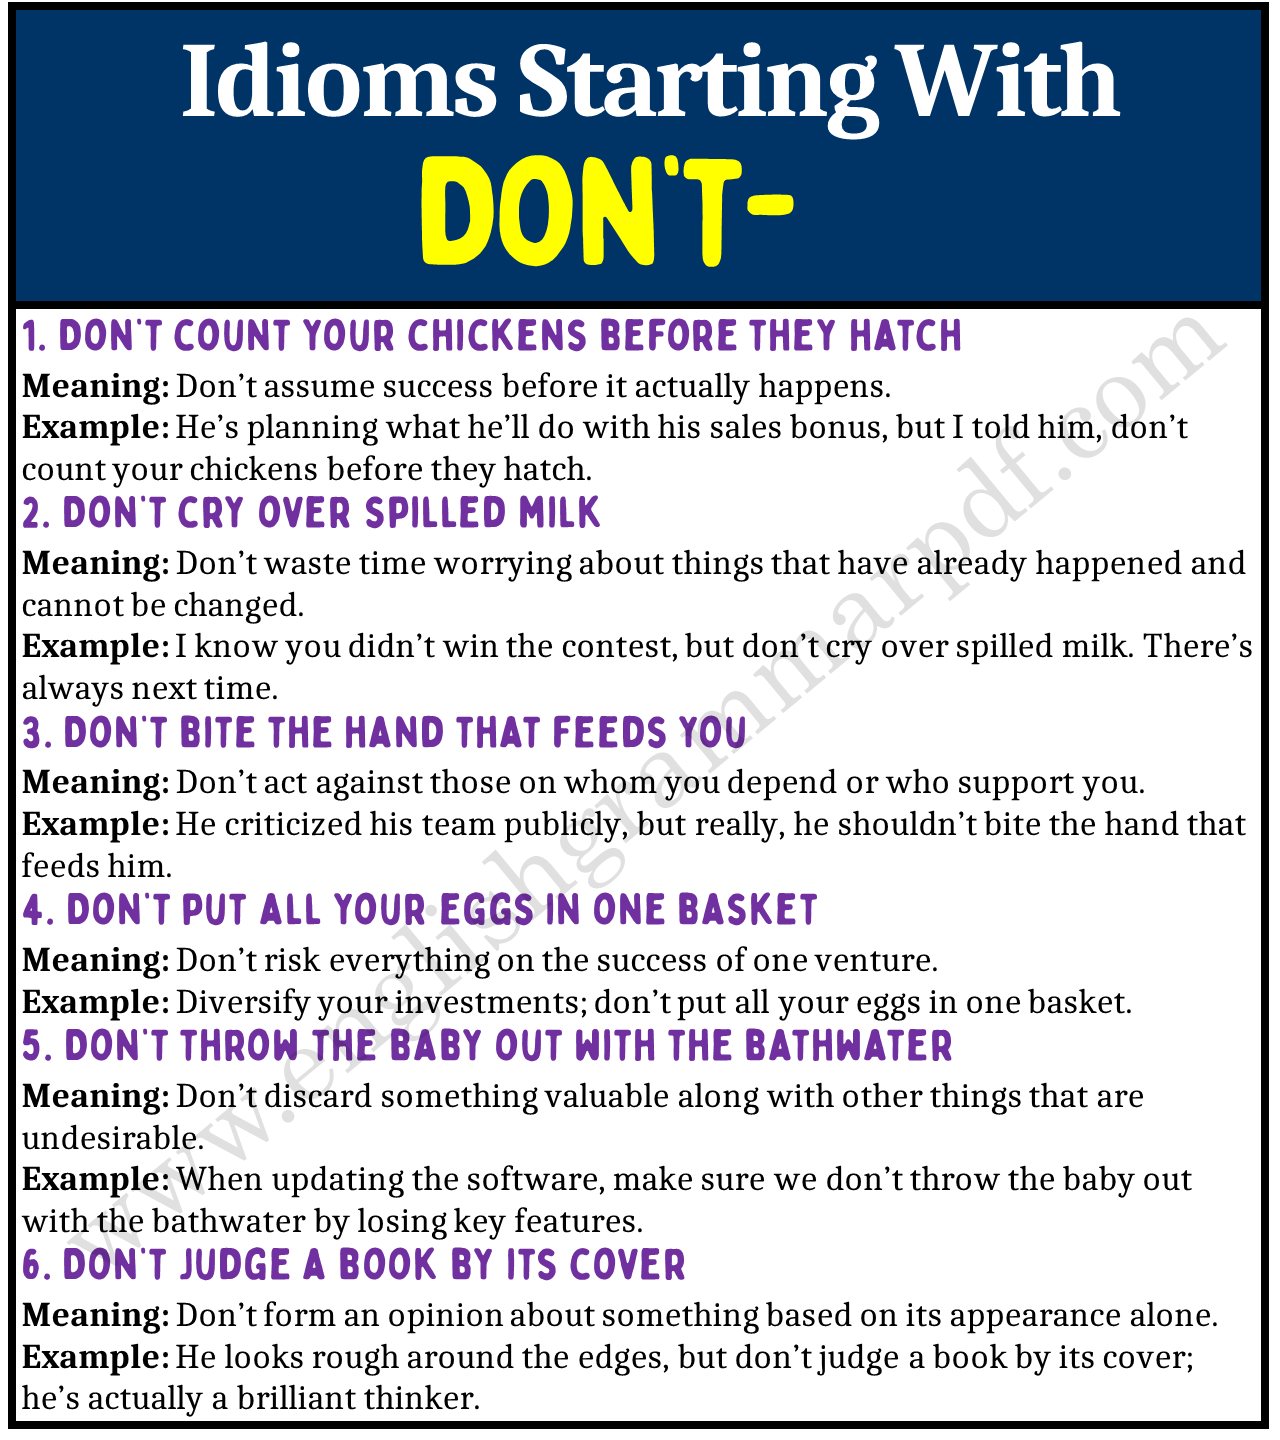 10 Idioms Starting with “DON’T”